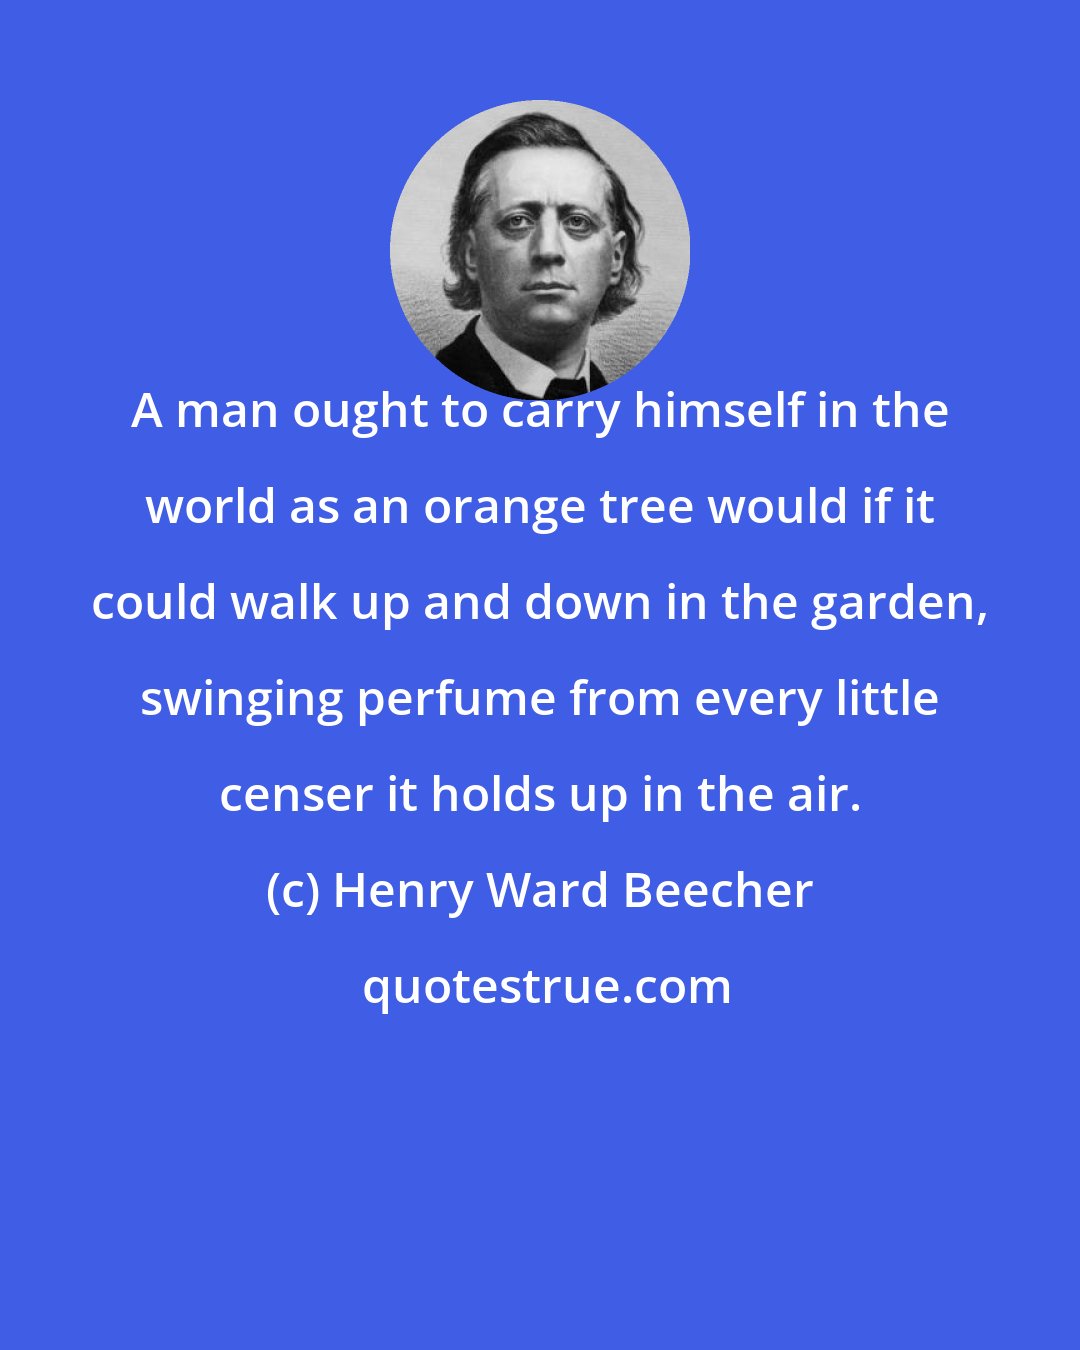 Henry Ward Beecher: A man ought to carry himself in the world as an orange tree would if it could walk up and down in the garden, swinging perfume from every little censer it holds up in the air.